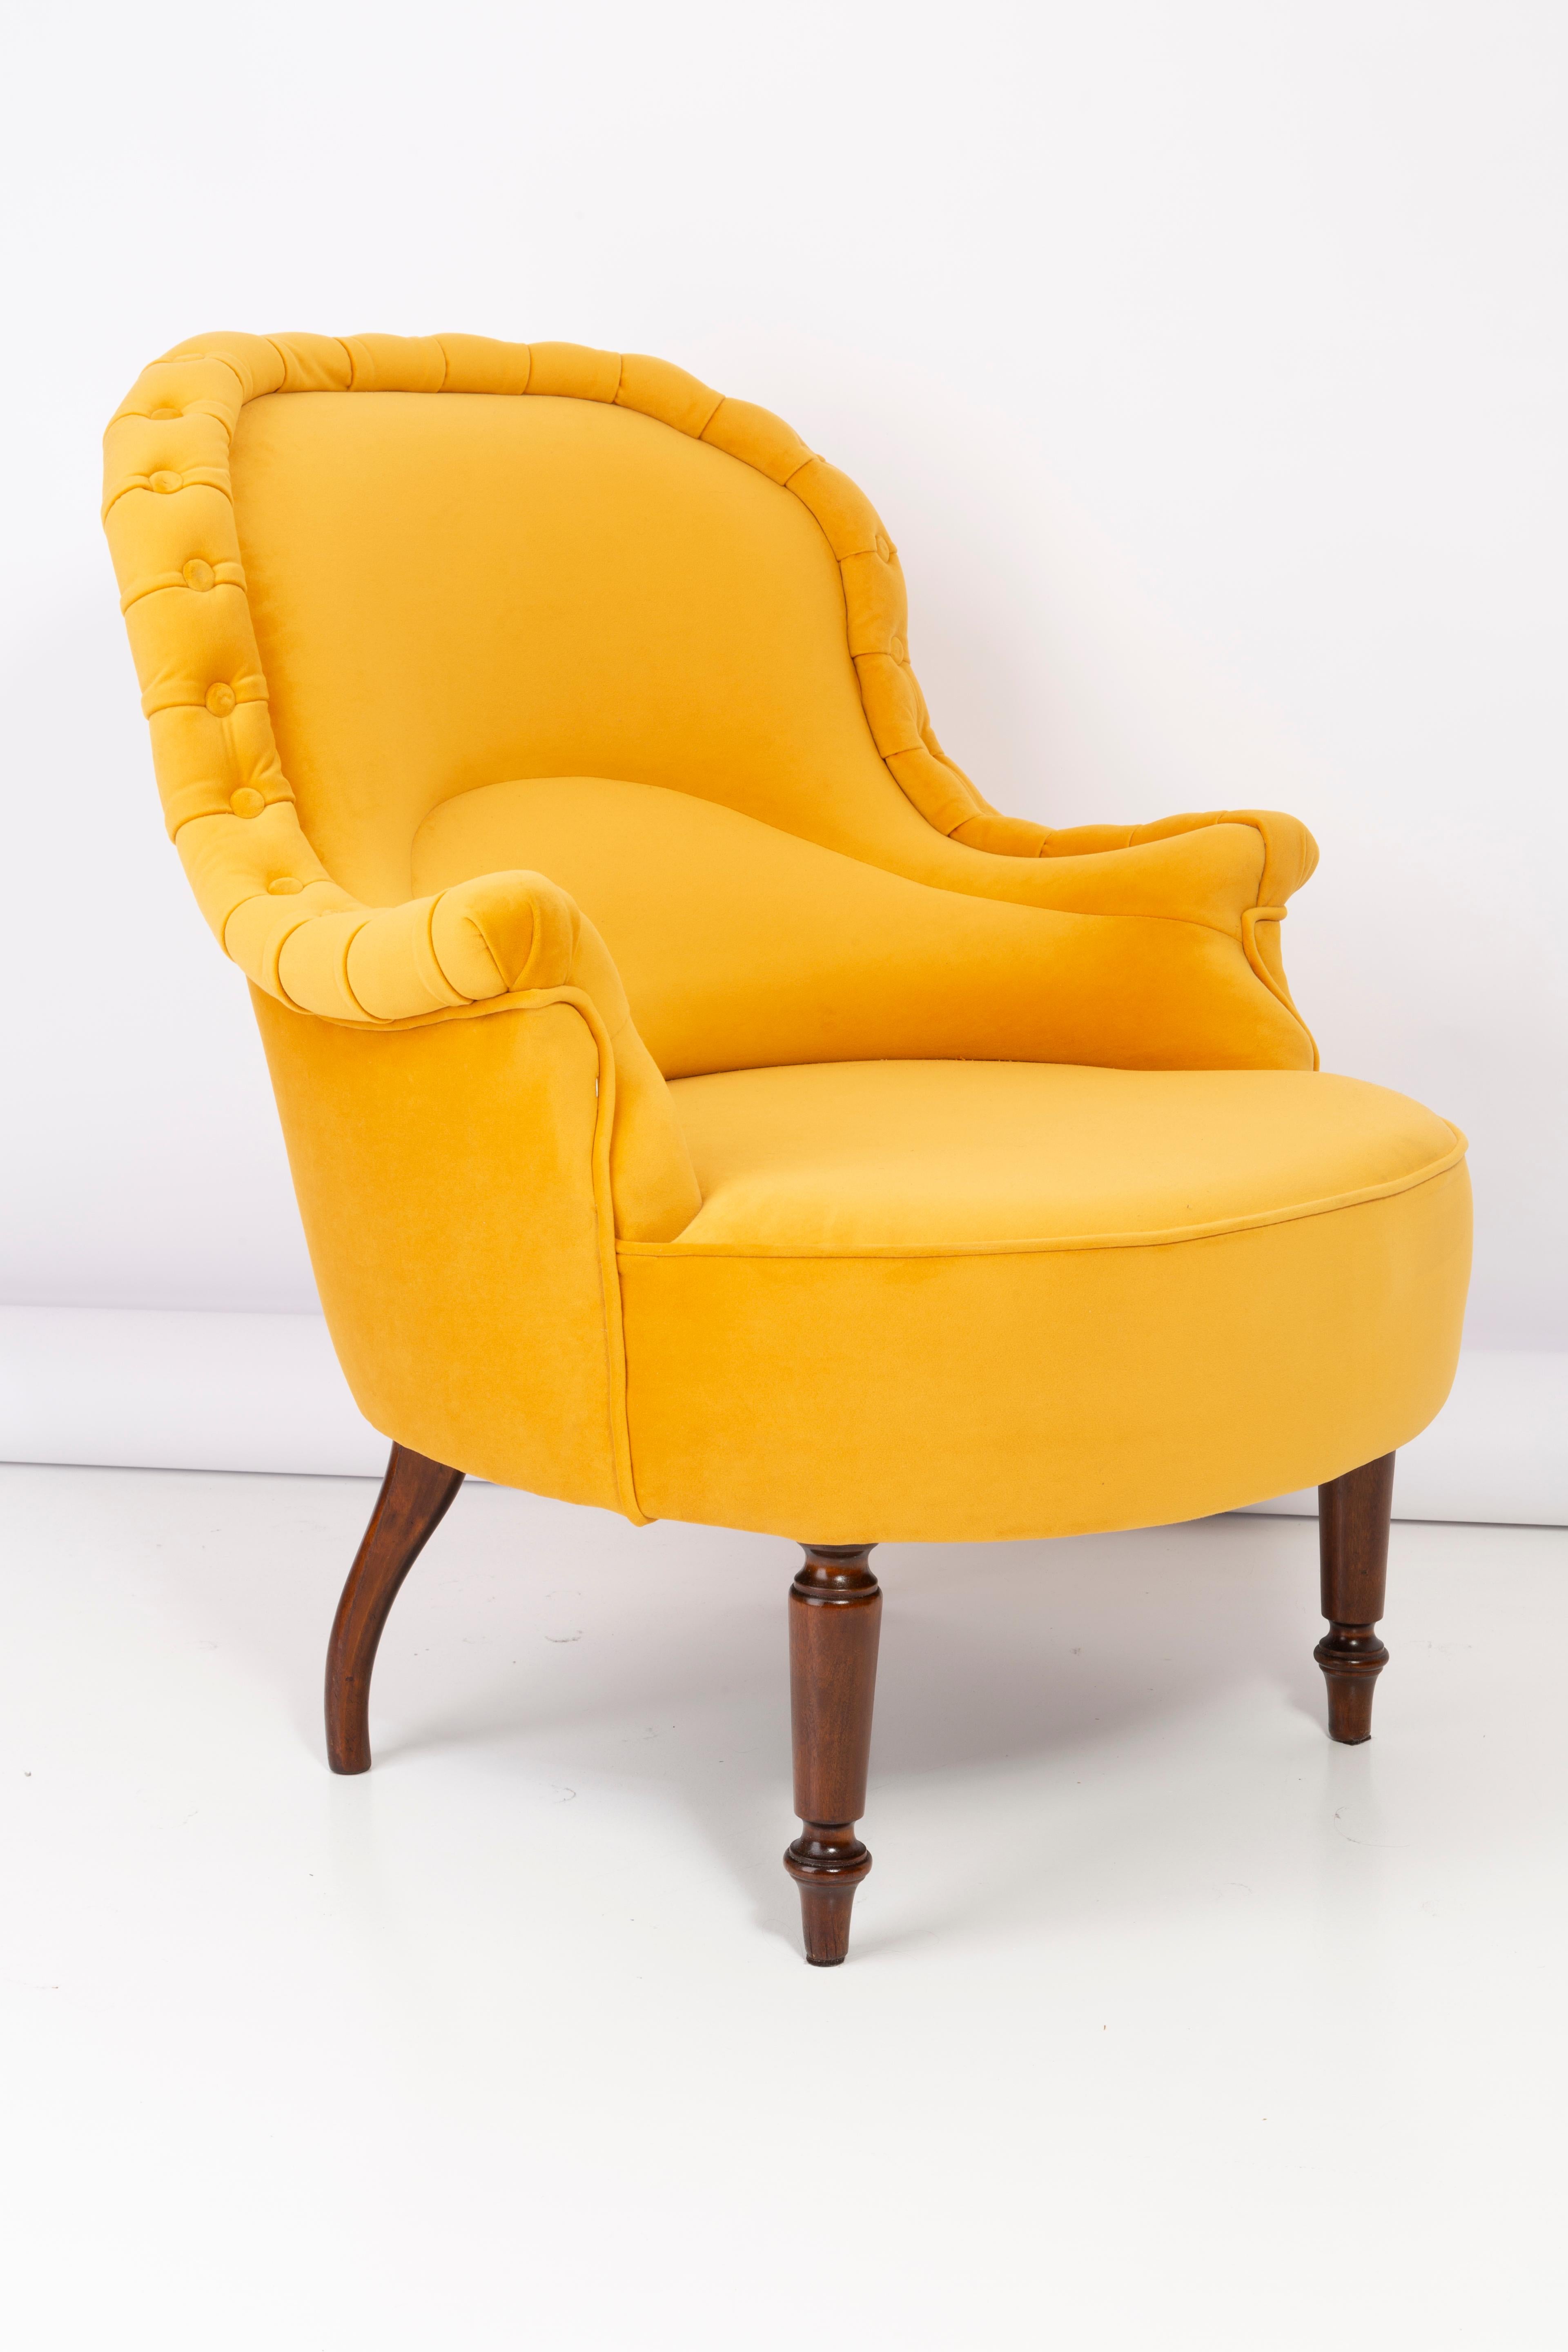 Pair of Unique Yellow Mustard Armchairs, 1930s, Germany For Sale 1